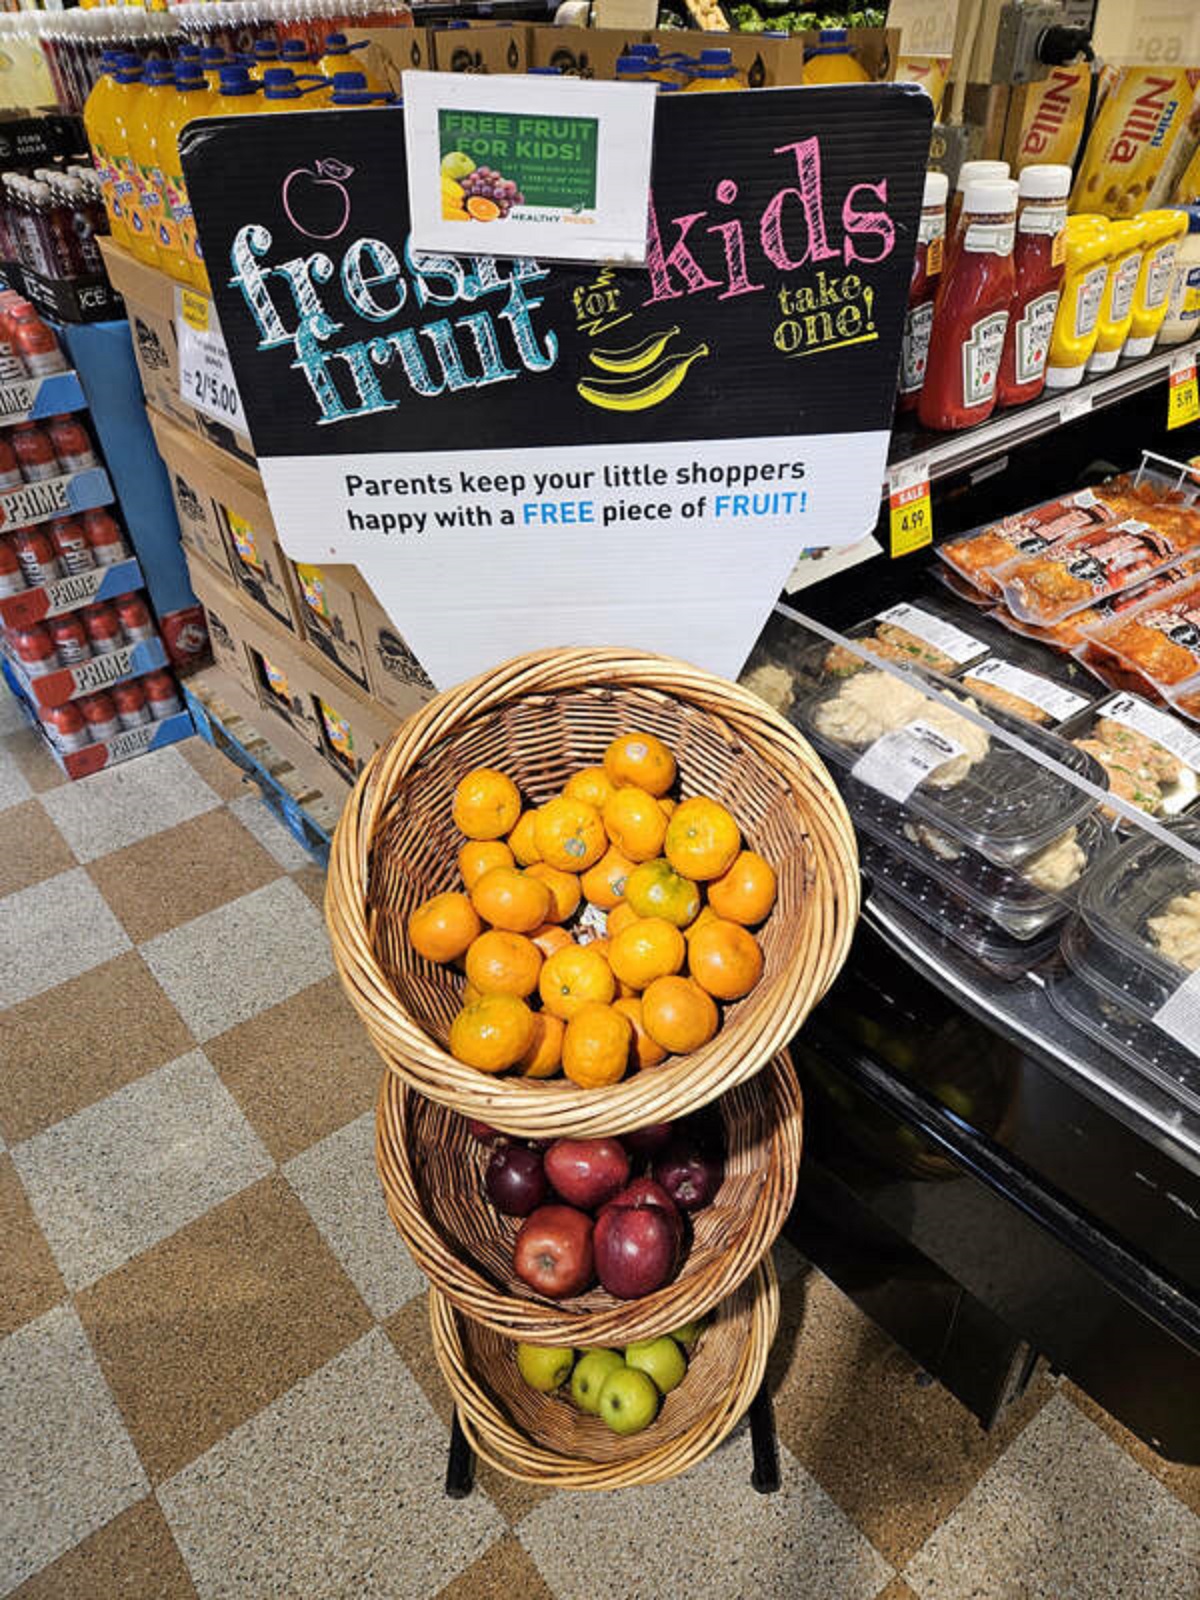 greengage - Nilla Nilla Fame Pobare Free Fruit Or Kids! free kids for Parents keep your little shoppers happy with a Free piece of Fruit! take one!